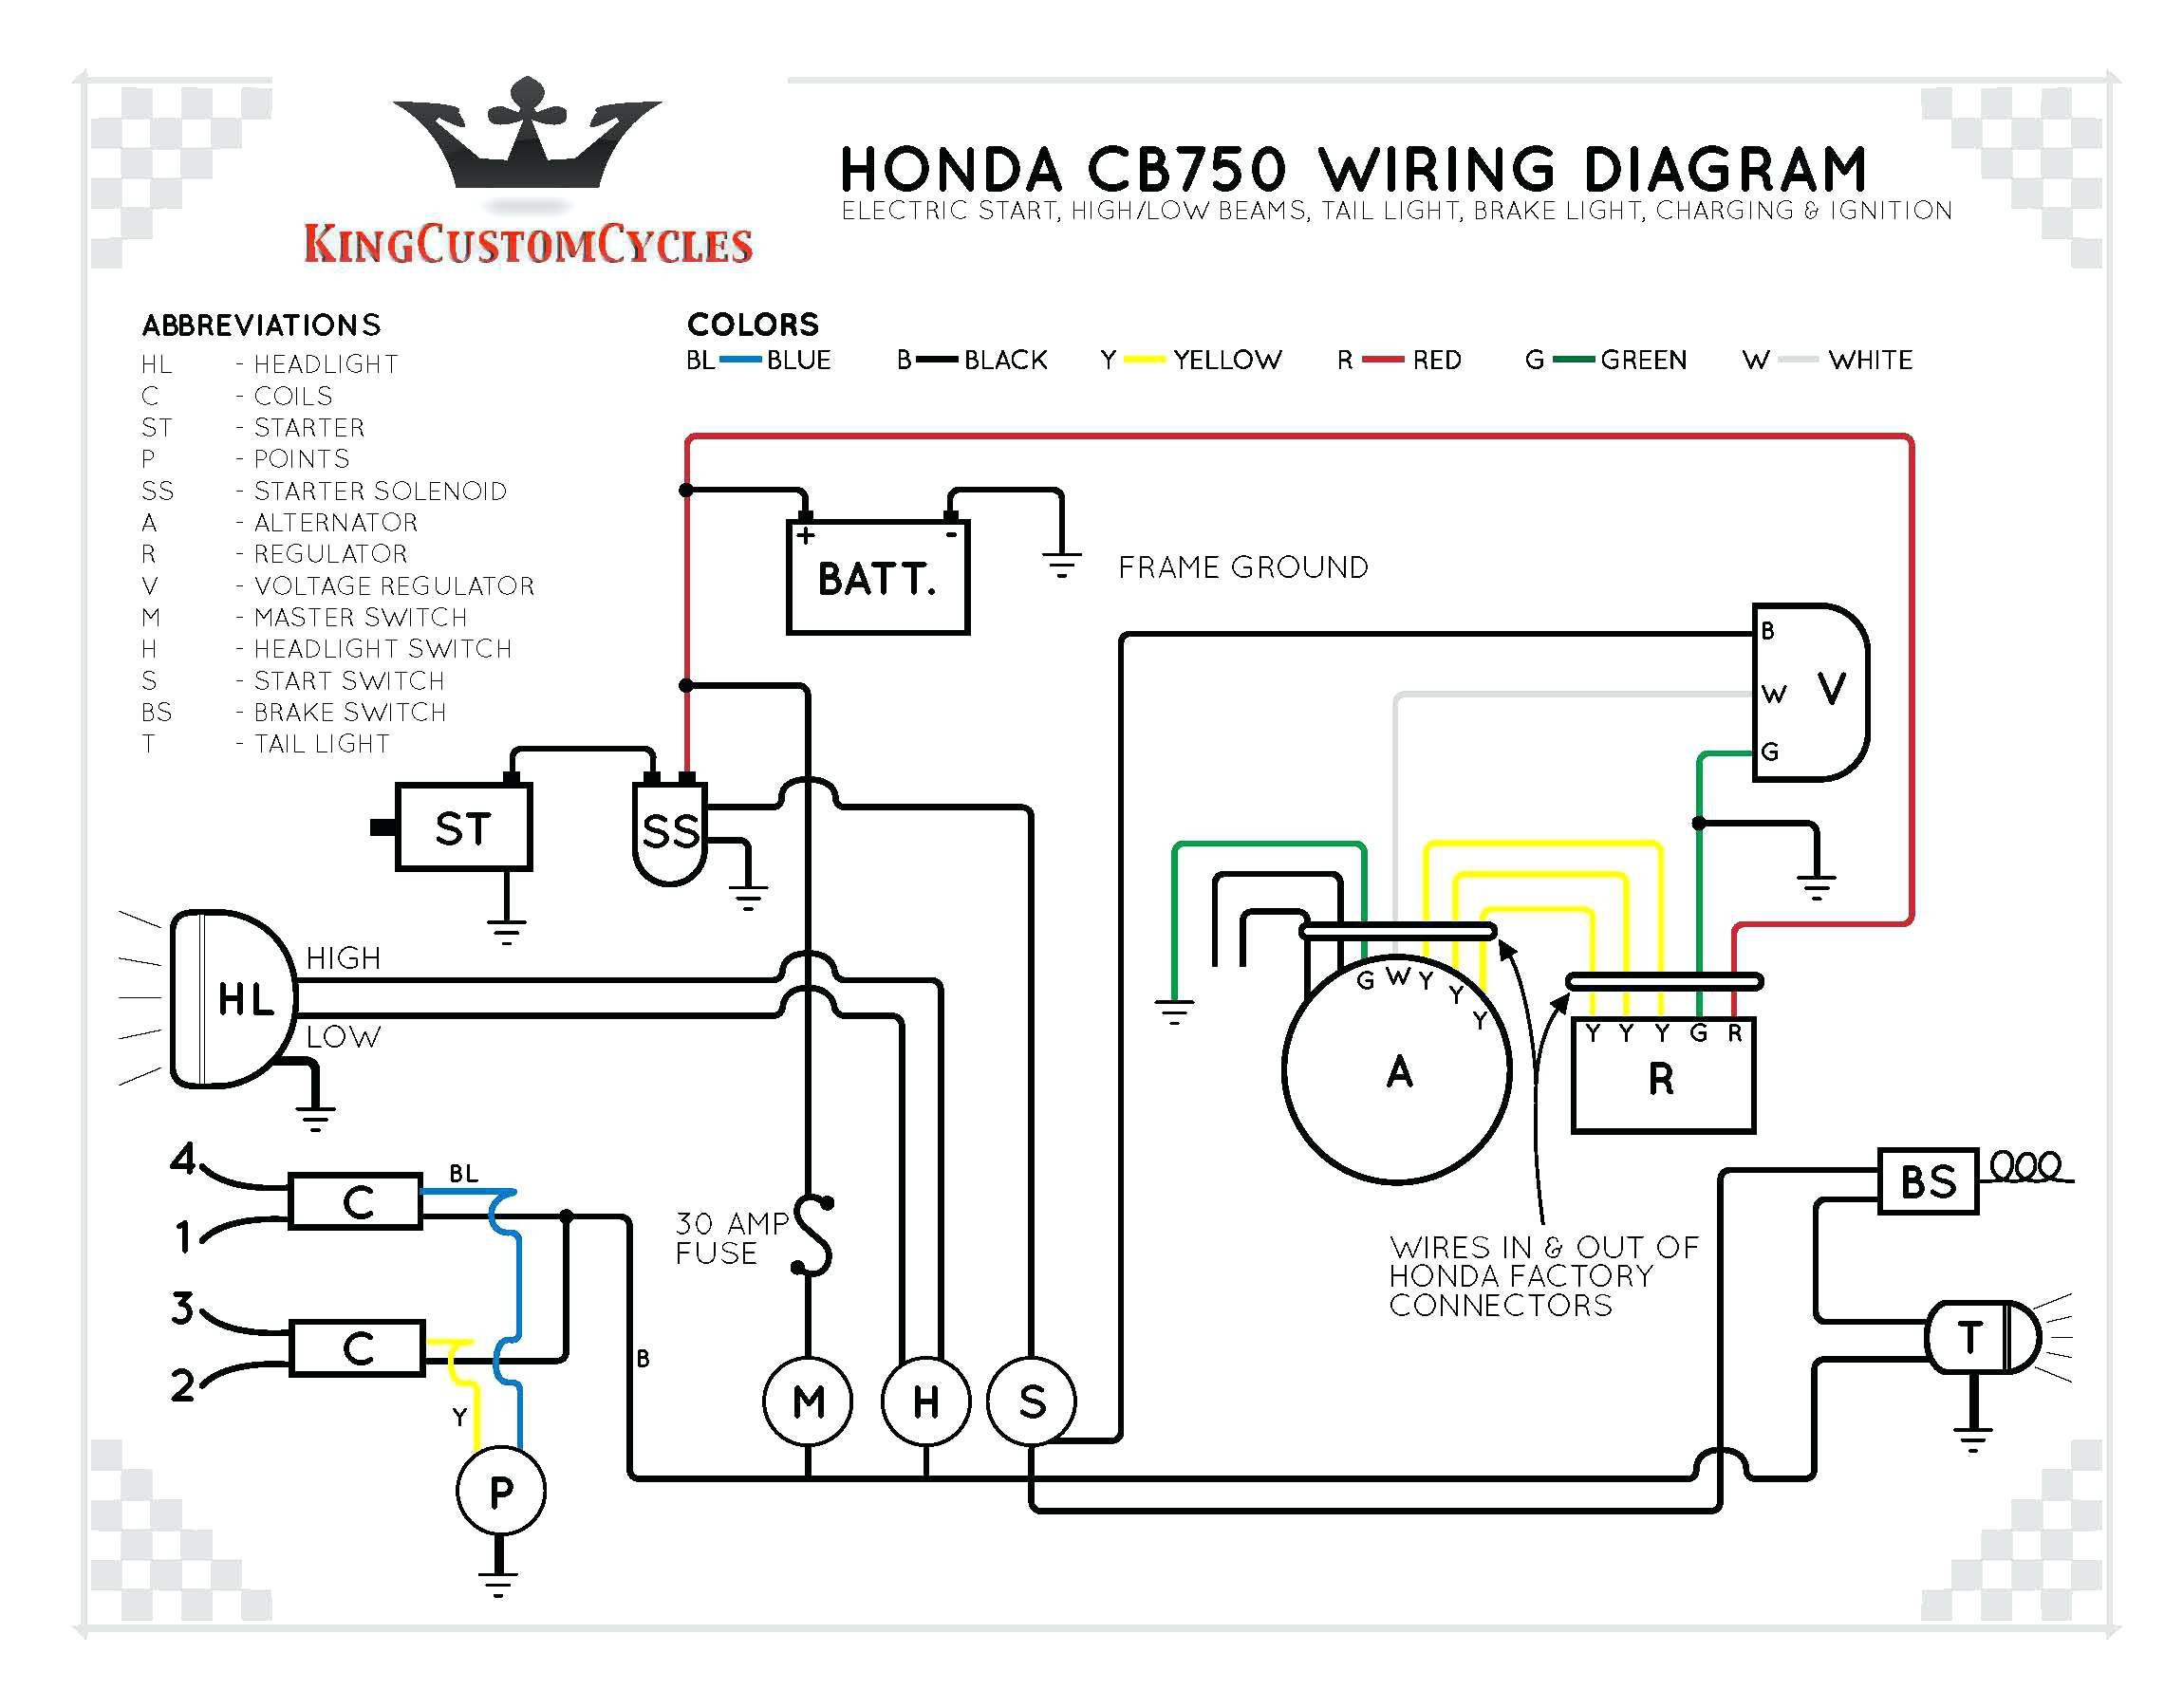 Wiring Diagram for Winch solenoid Valid Wiring Diagram for Warn Winch Fresh Warn Winch Wiring Diagram